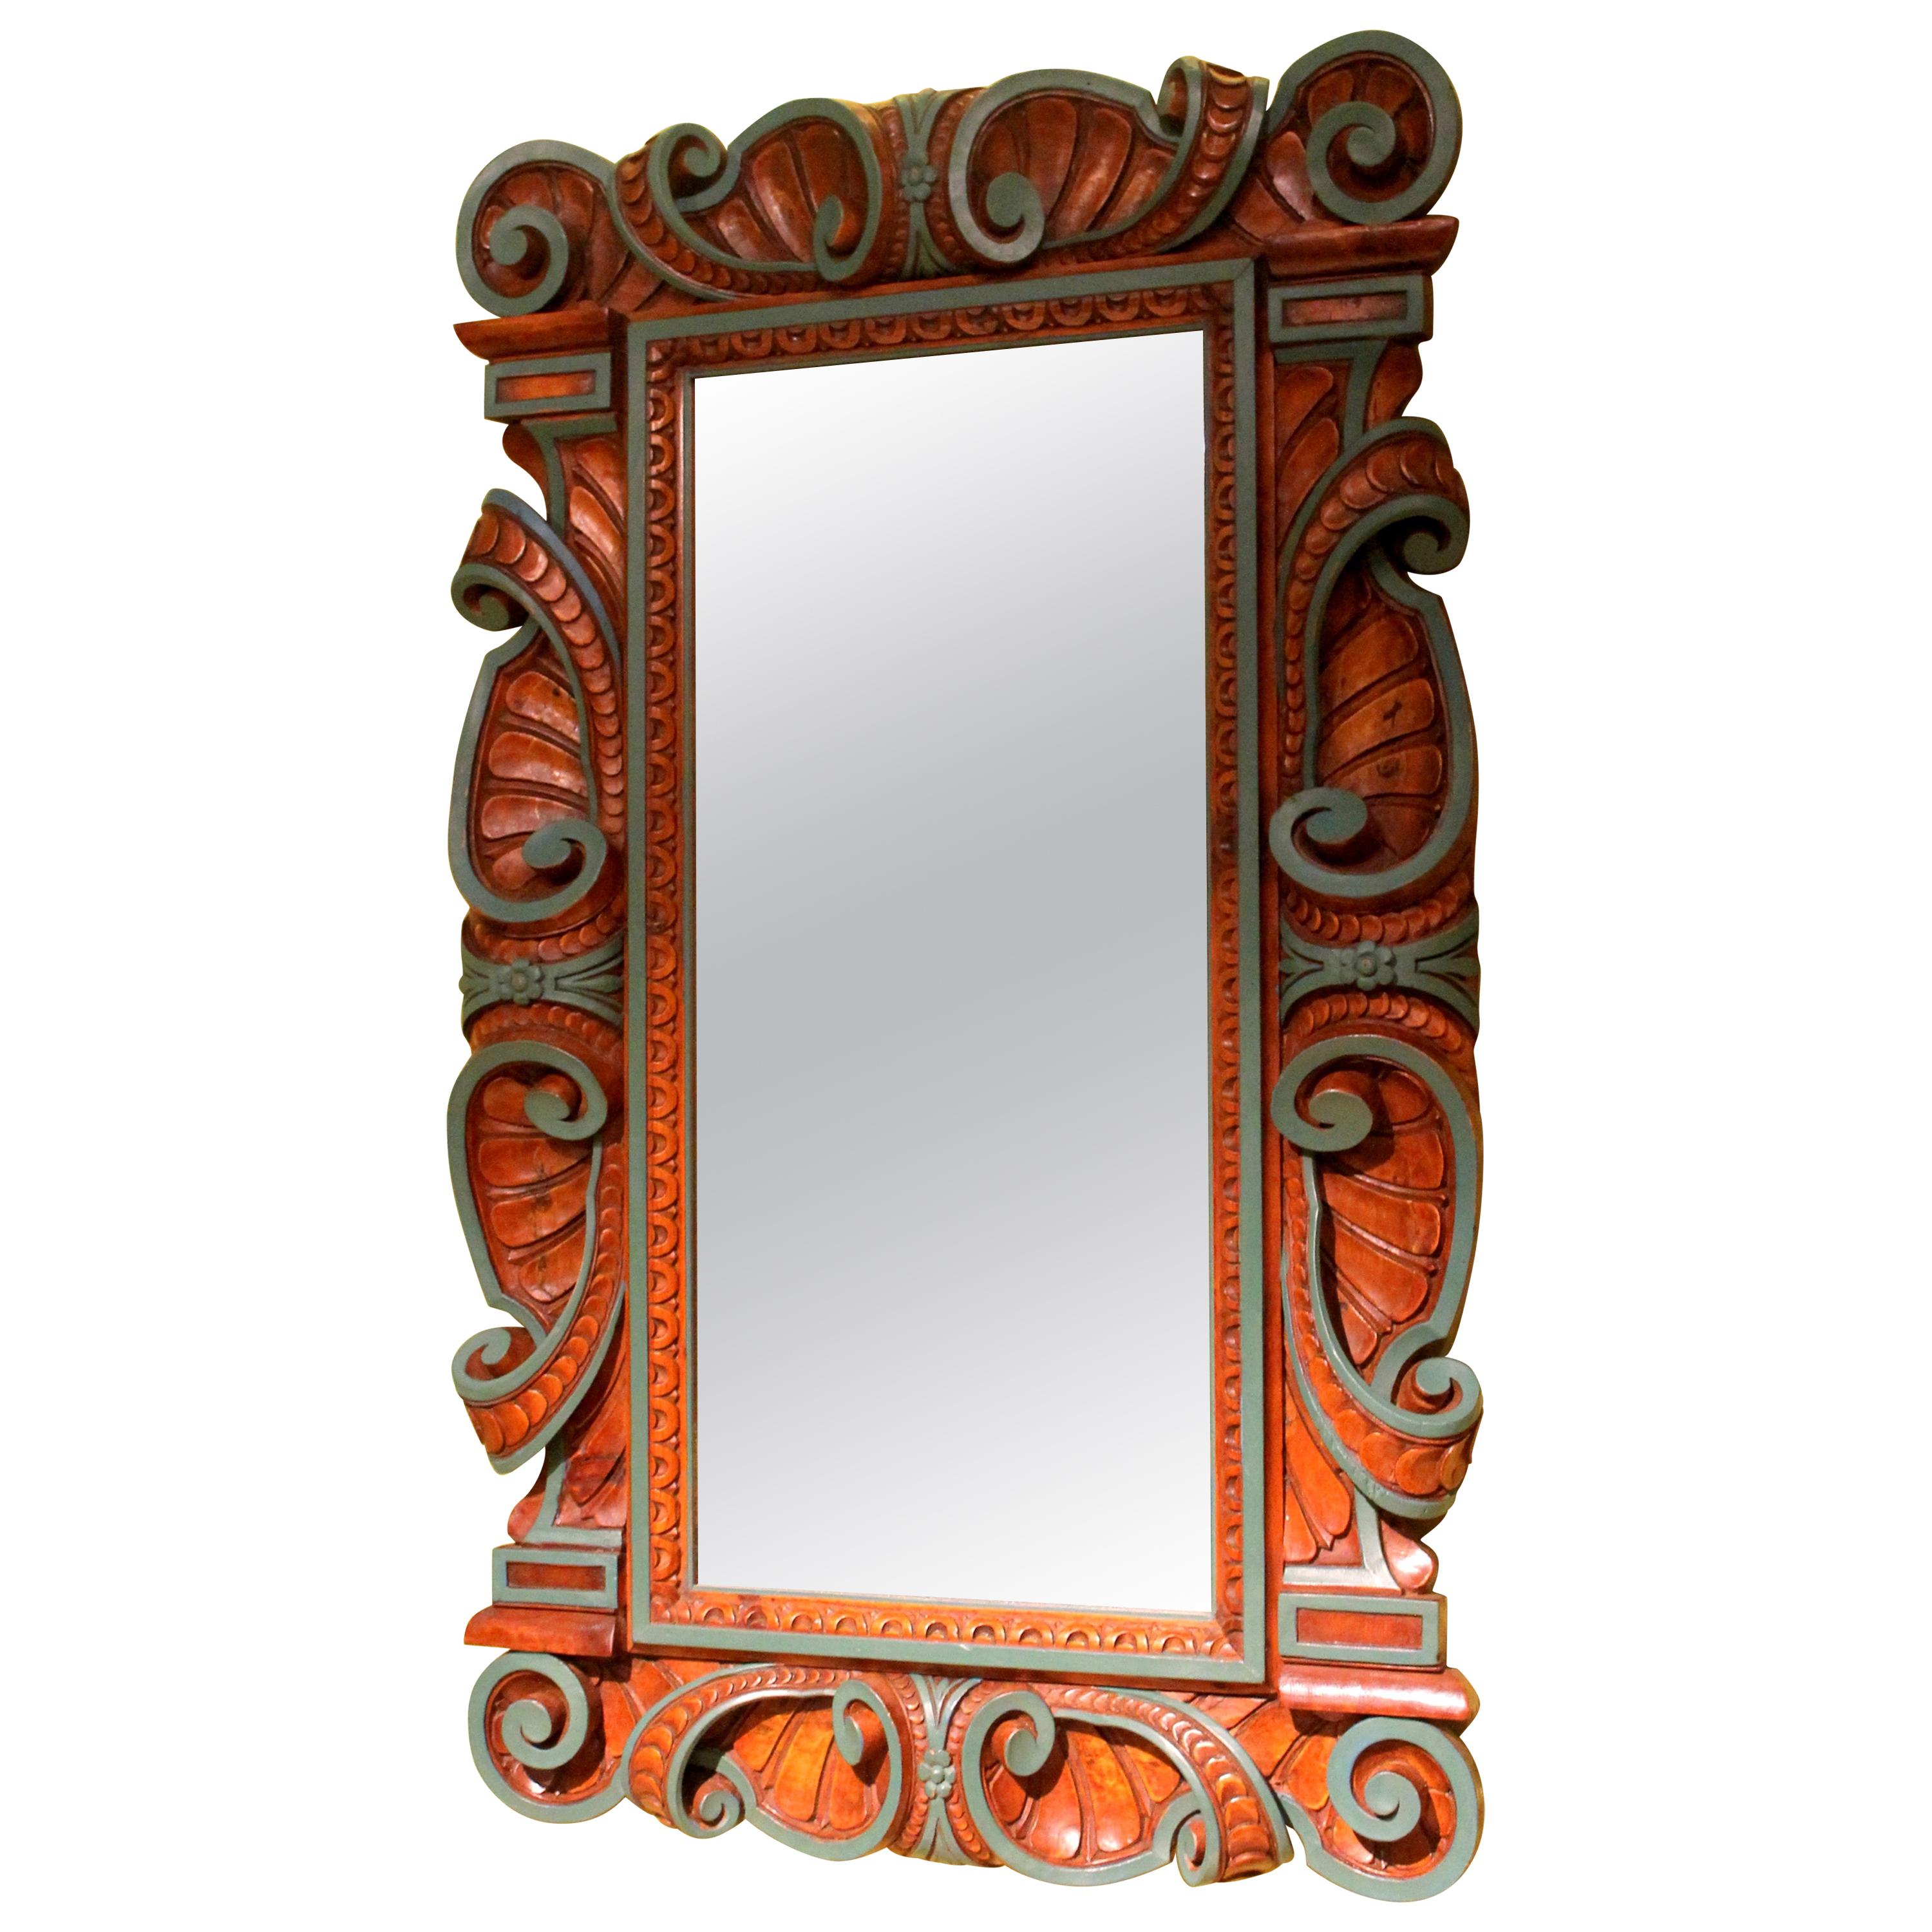 Italian Renaissance Revival Style Frame Mirror Carved and Lacquer Walnut Wood